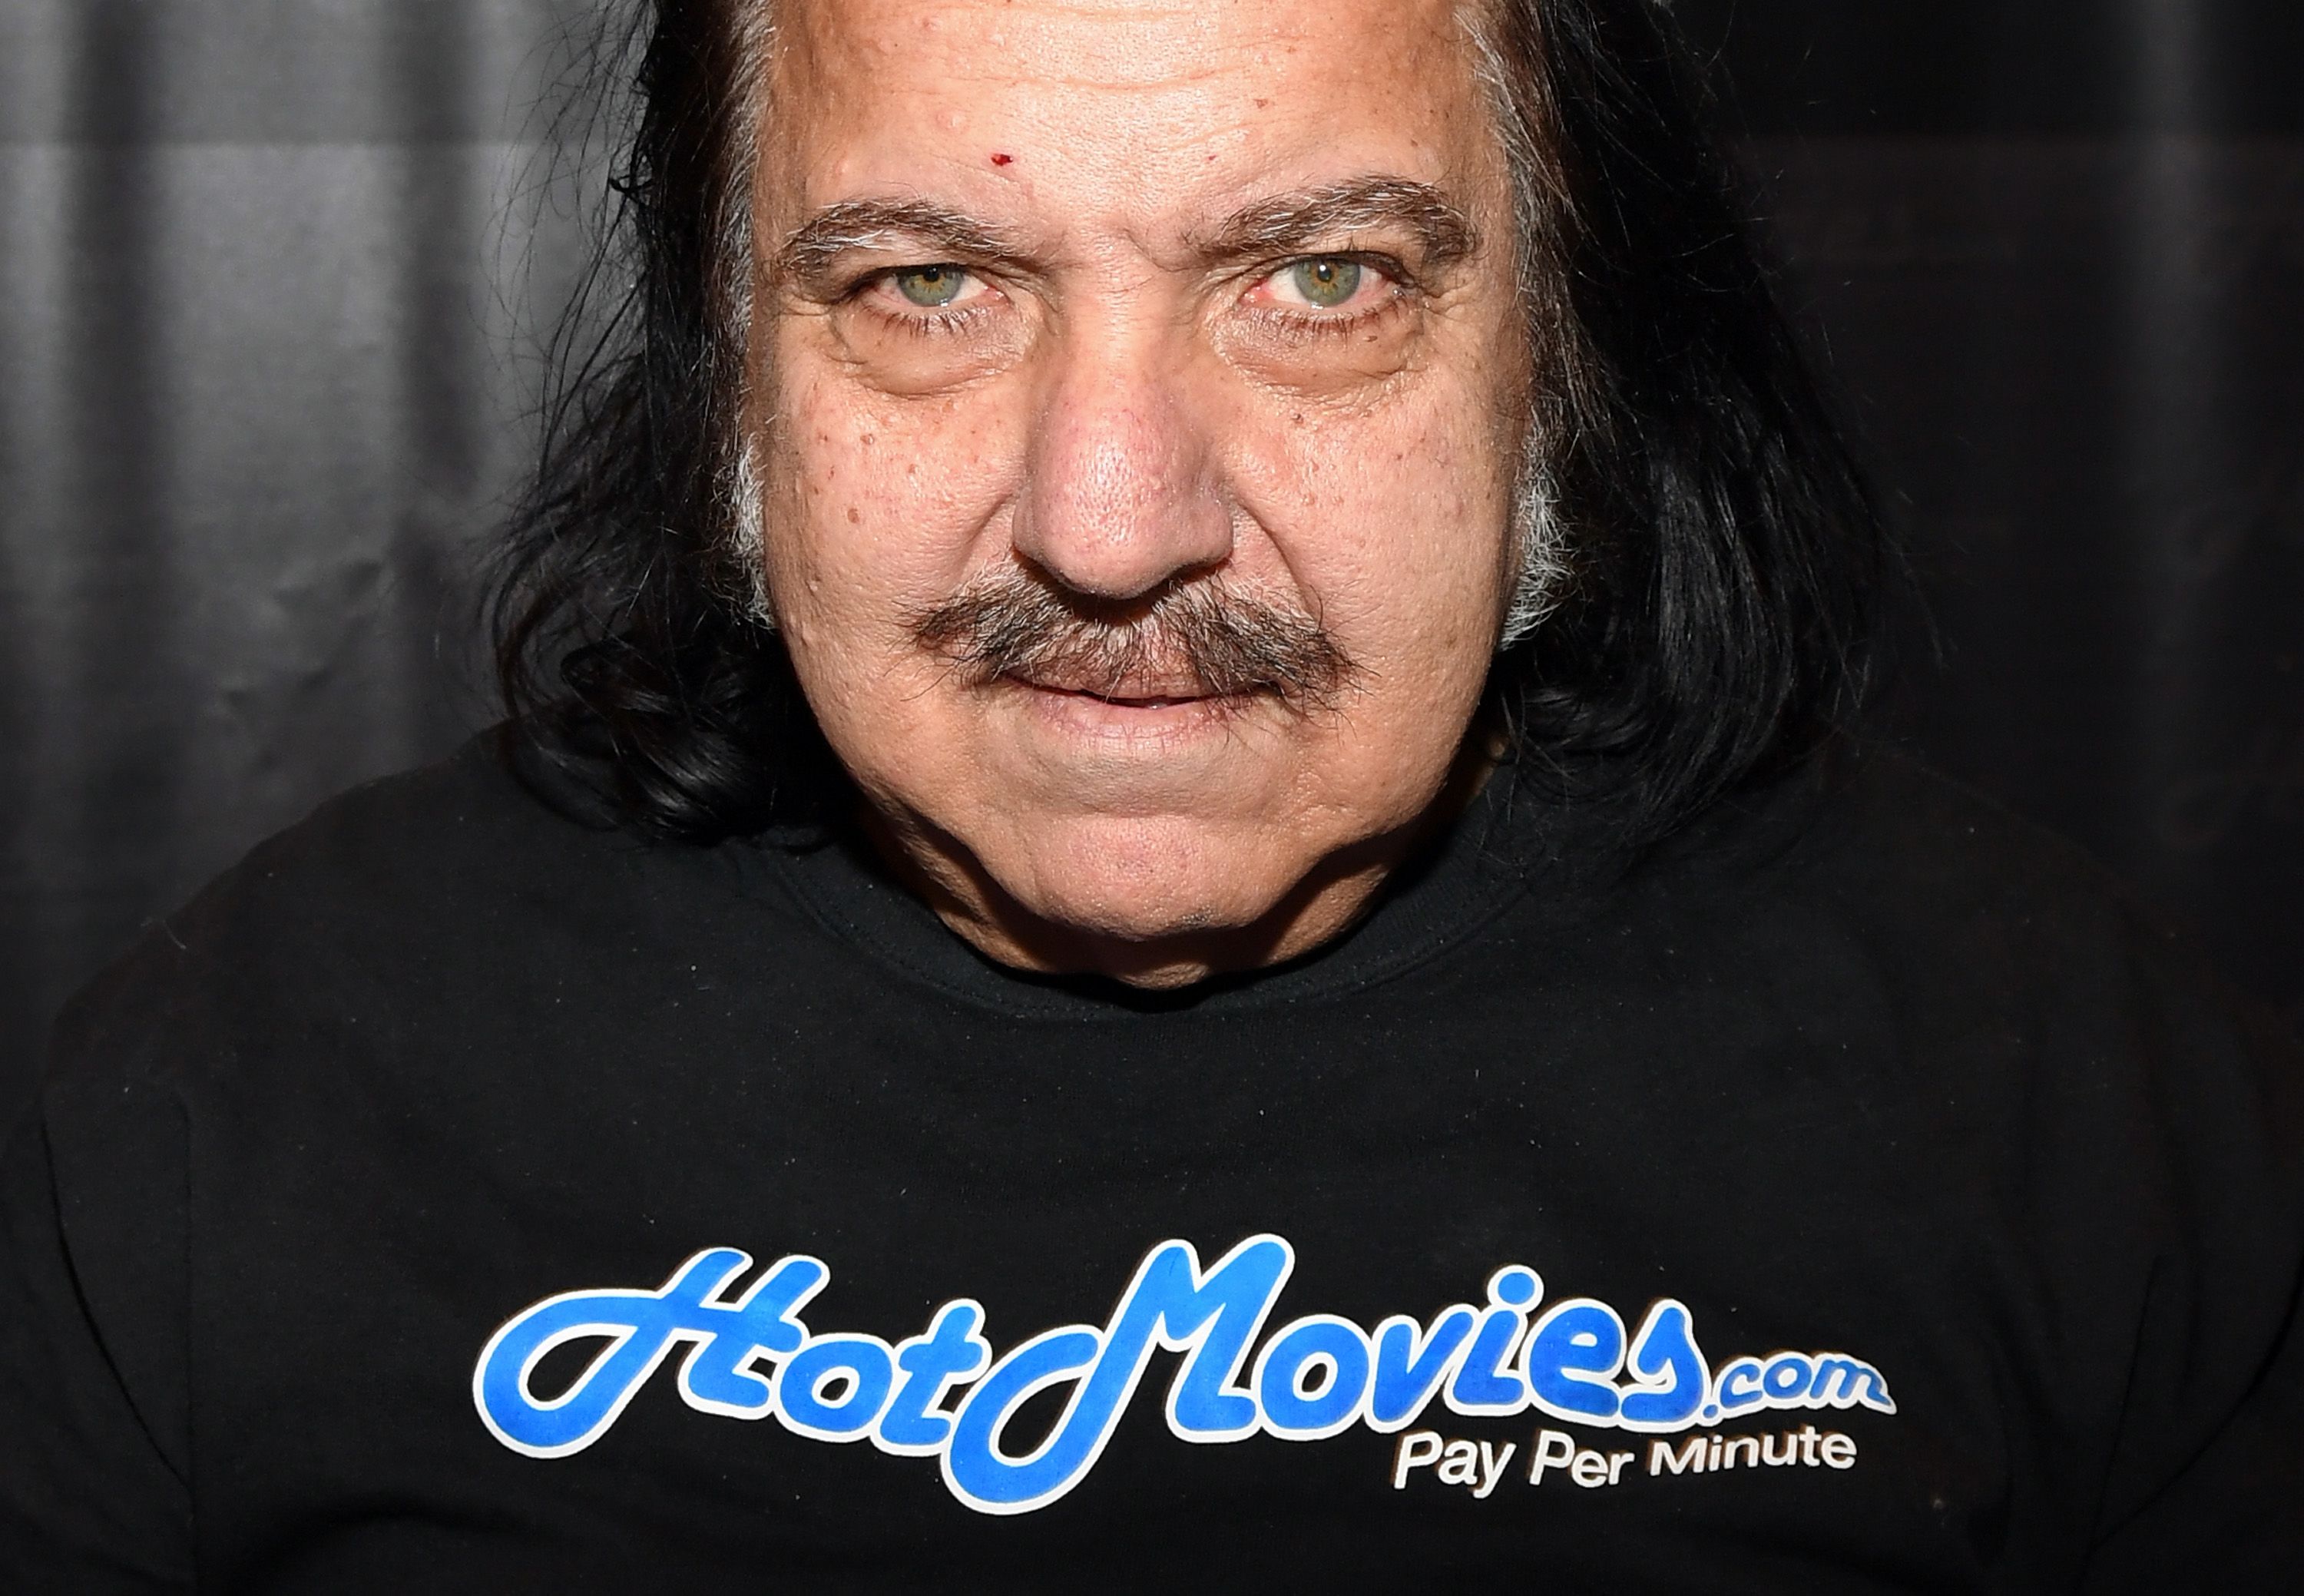 Ron Jeremy, porn star, charged with sexually assaulting four women | CNN